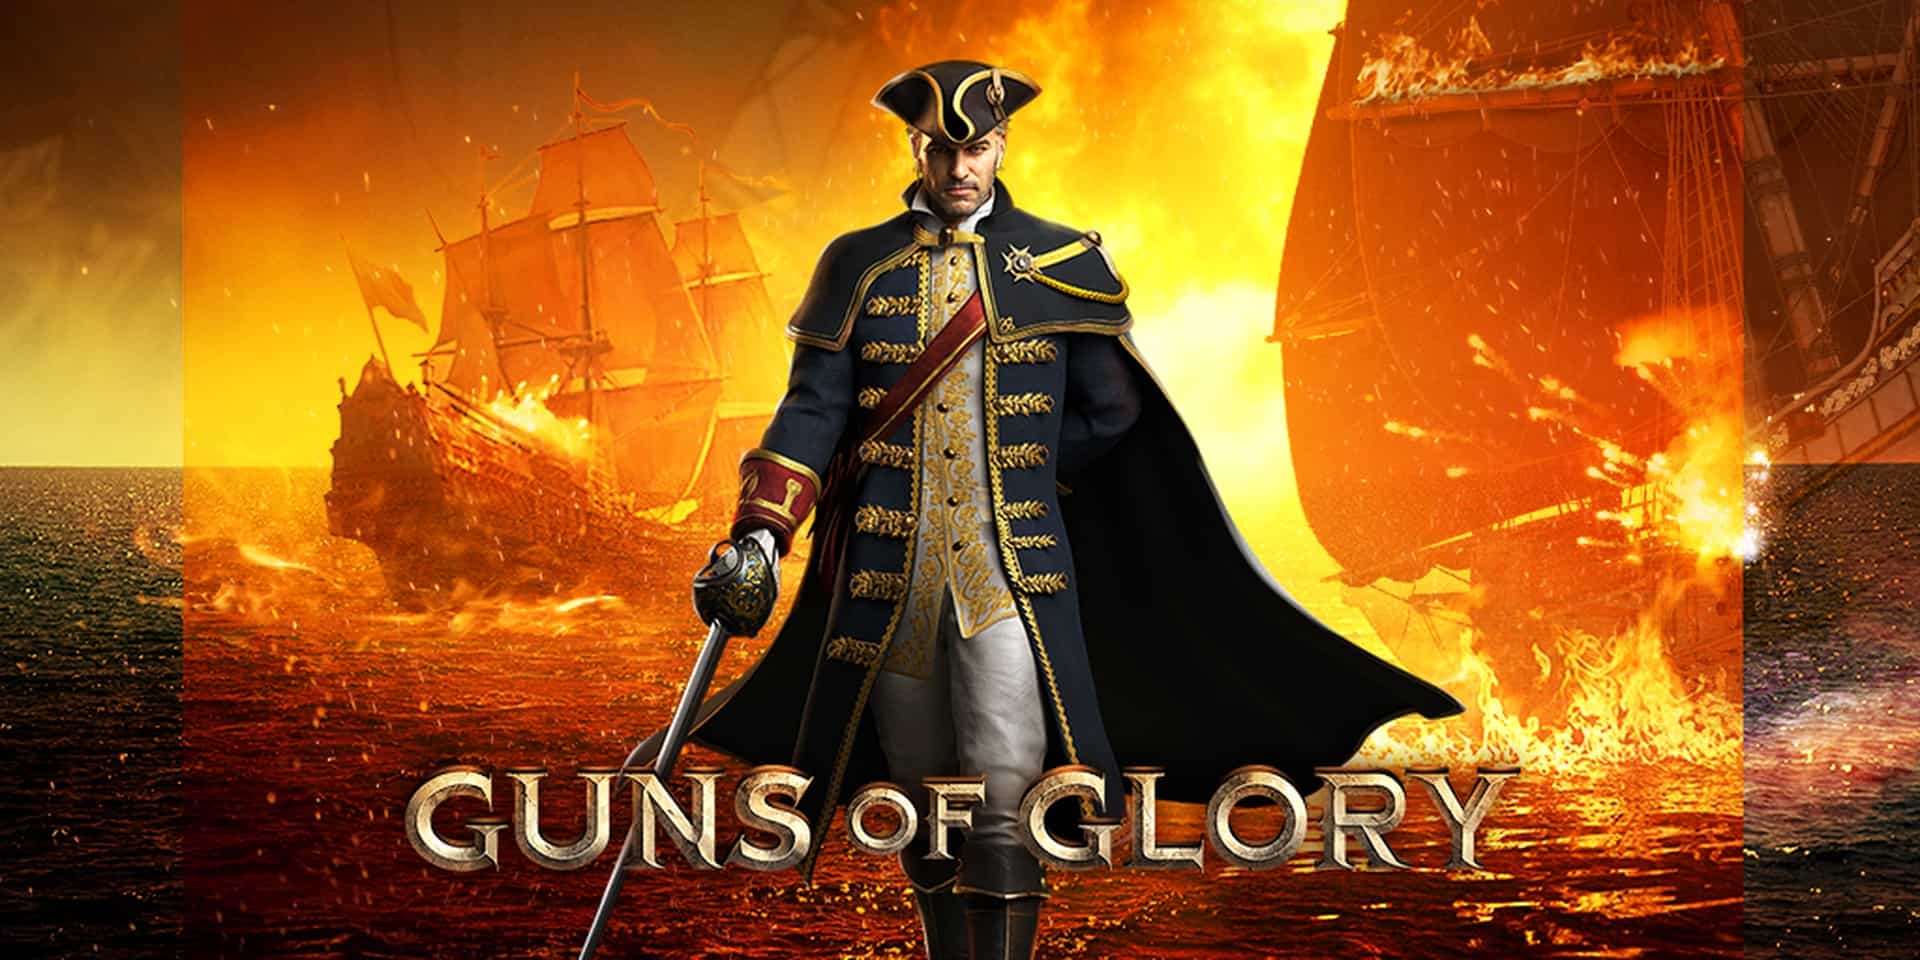 Promotional art for Guns of Glory, one of FunPlus' games.